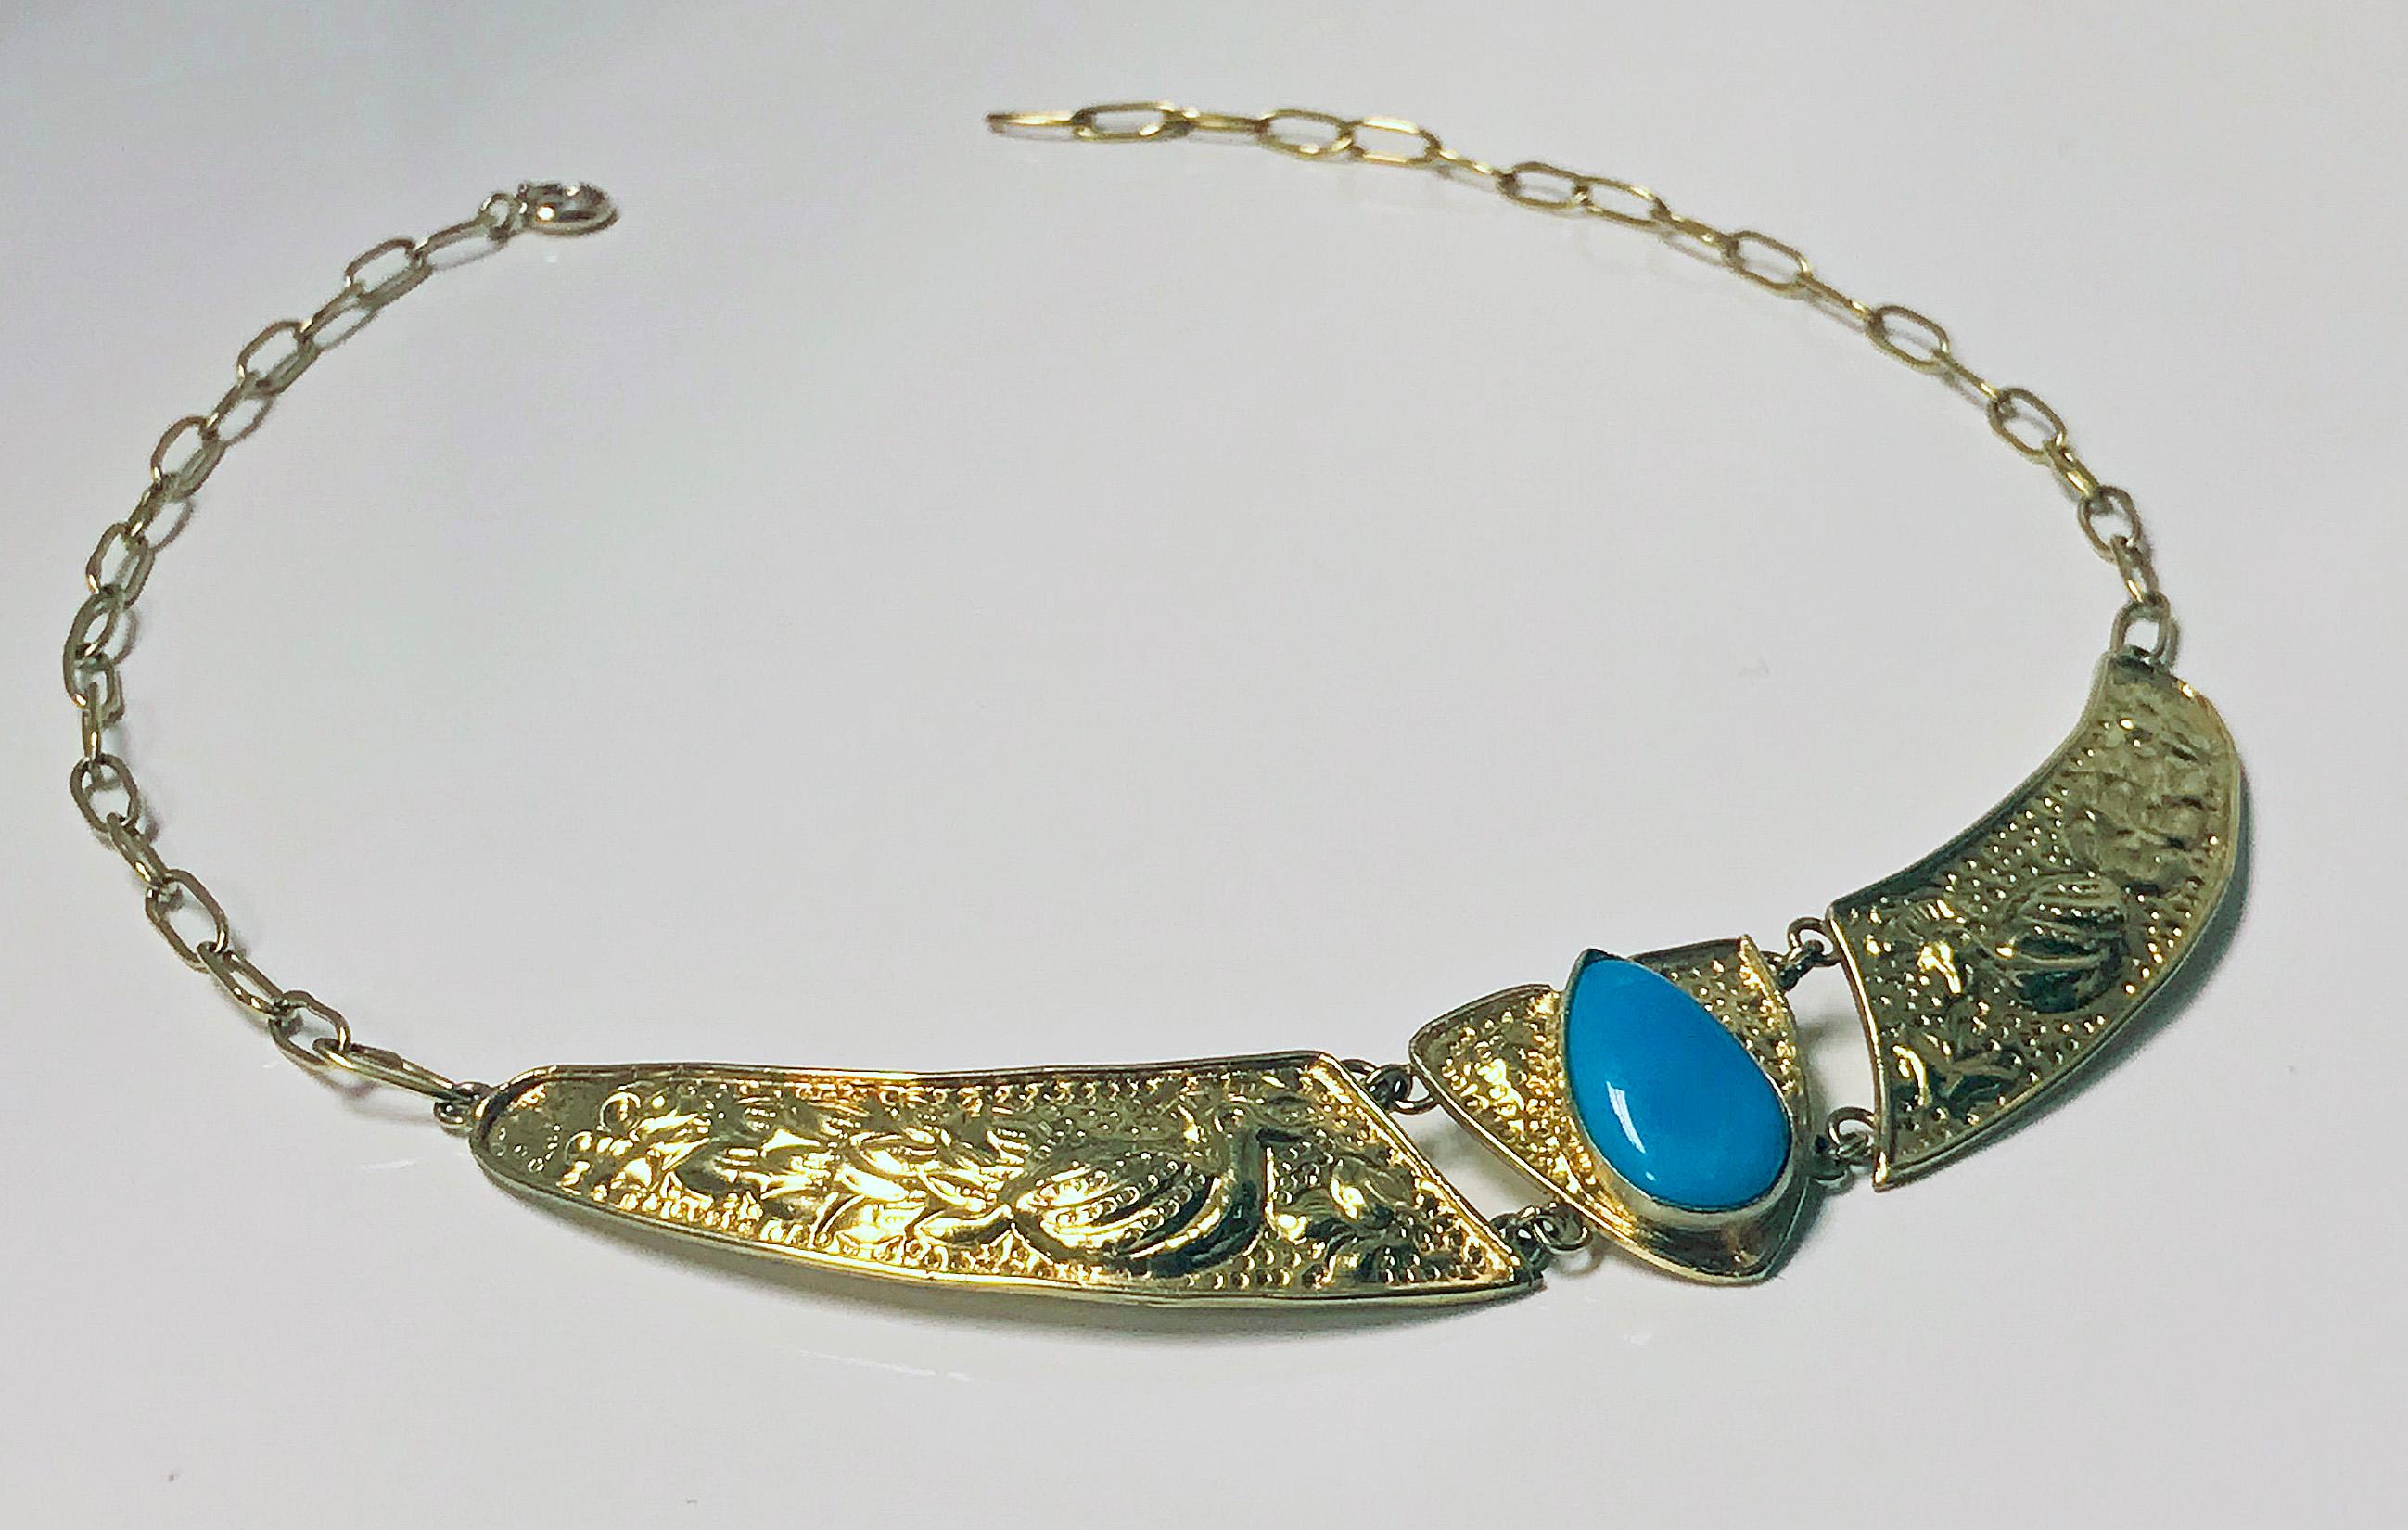 Women's Art Nouveau Style Yellow Gold and Turquoise Necklace